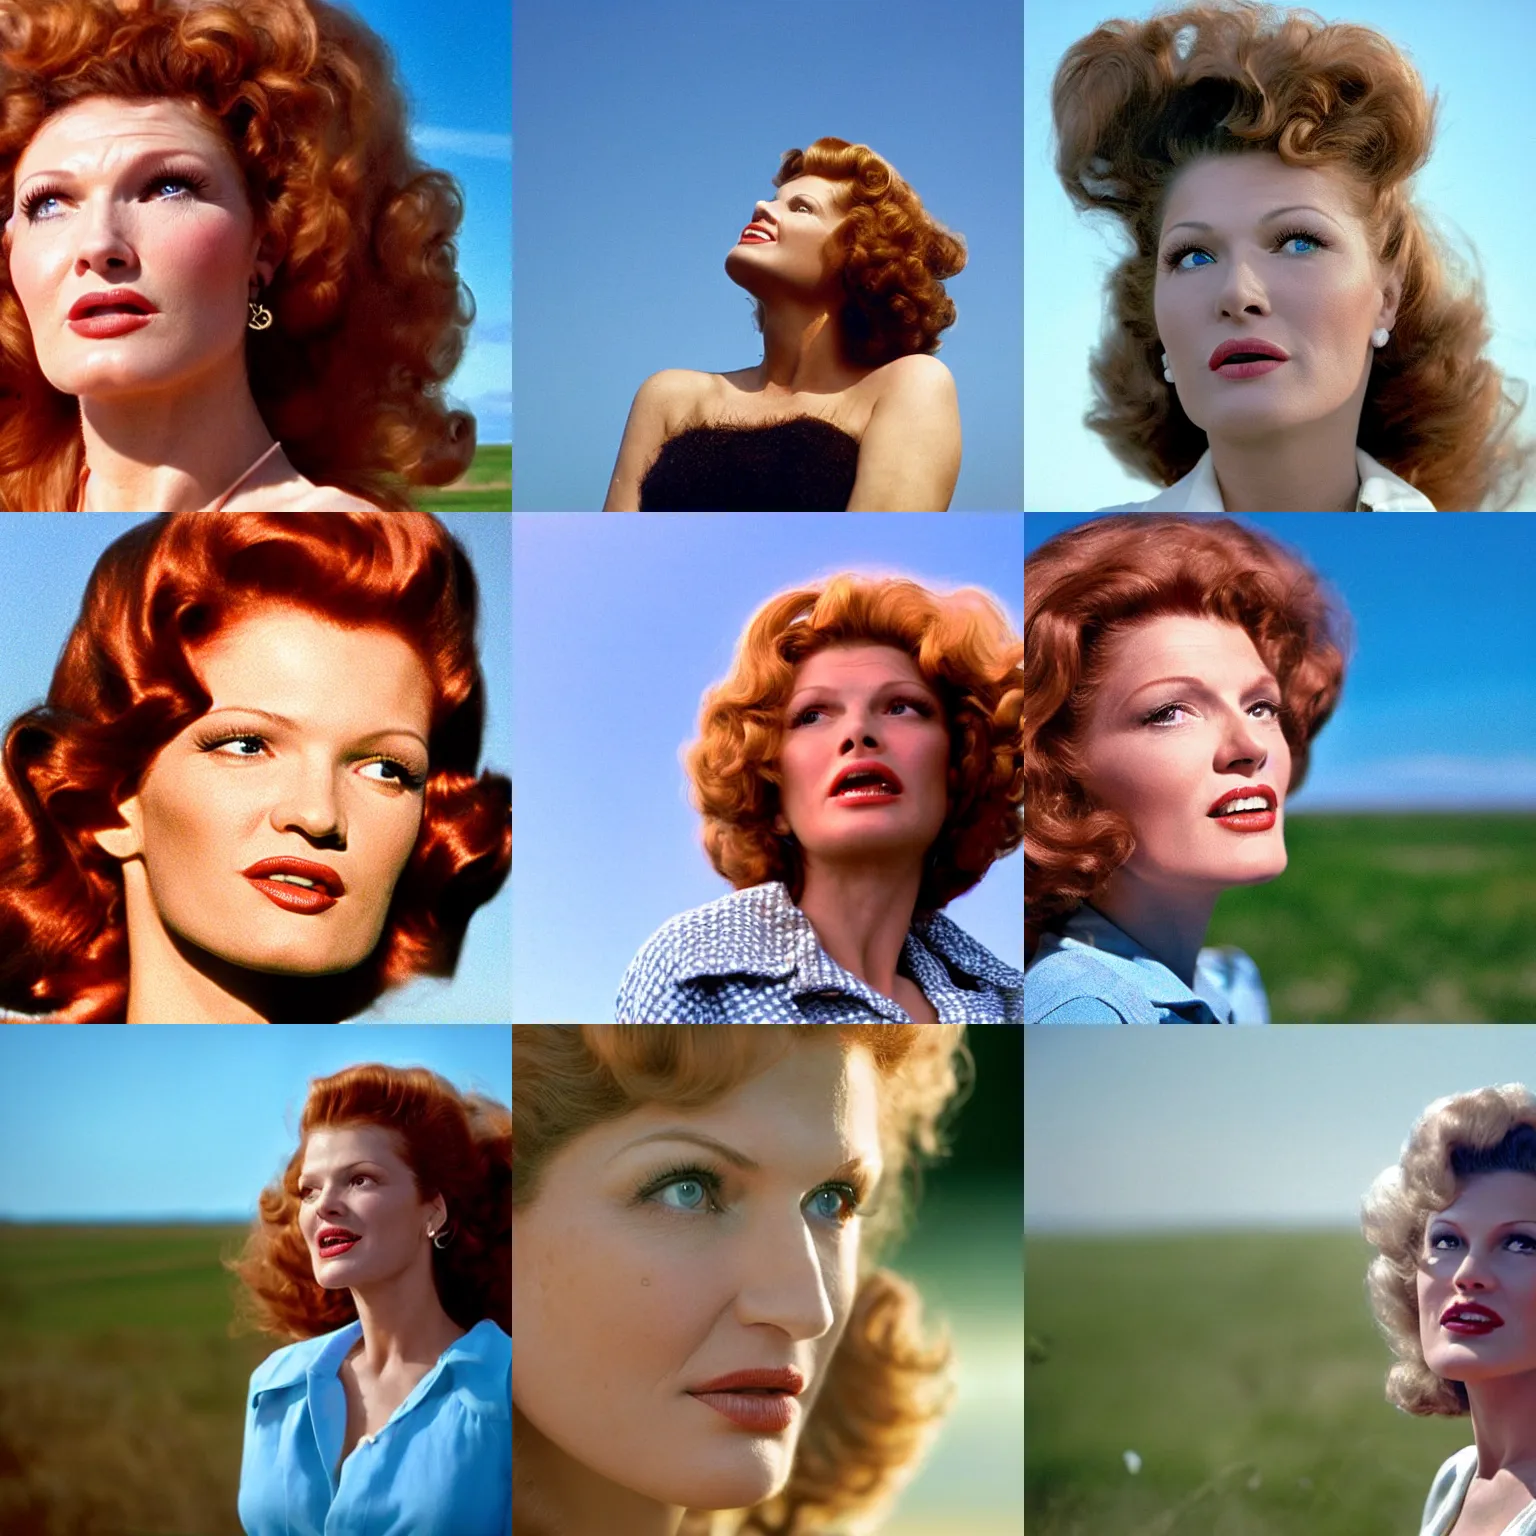 Prompt: natural 8 k close up shot in a 2 0 0 5 romantic comedy by sam mendes of rita hayworth. she stands and looks on the horizon with winds moving her hair. fuzzy blue sky in the background. no make - up, no lipstick, small details, wrinkles, dramatic backlighting, 8 5 mm lenses, sharp focus